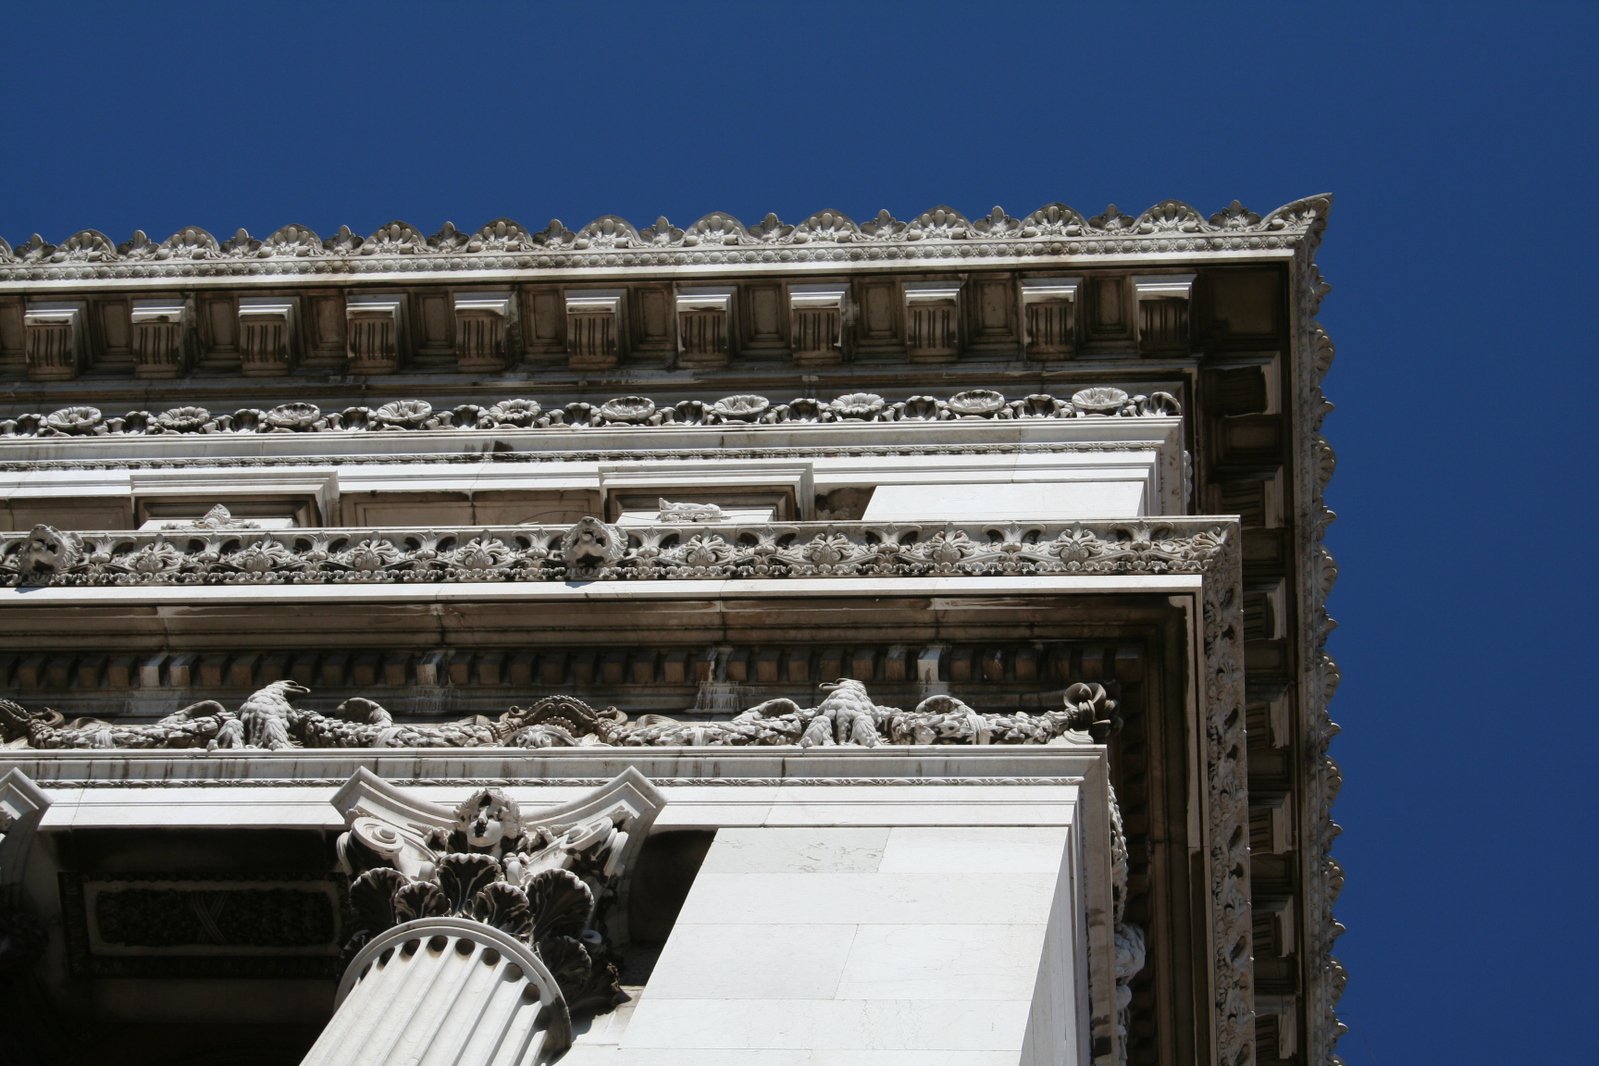 close up view of an intricate architecture, with a blue sky in the background